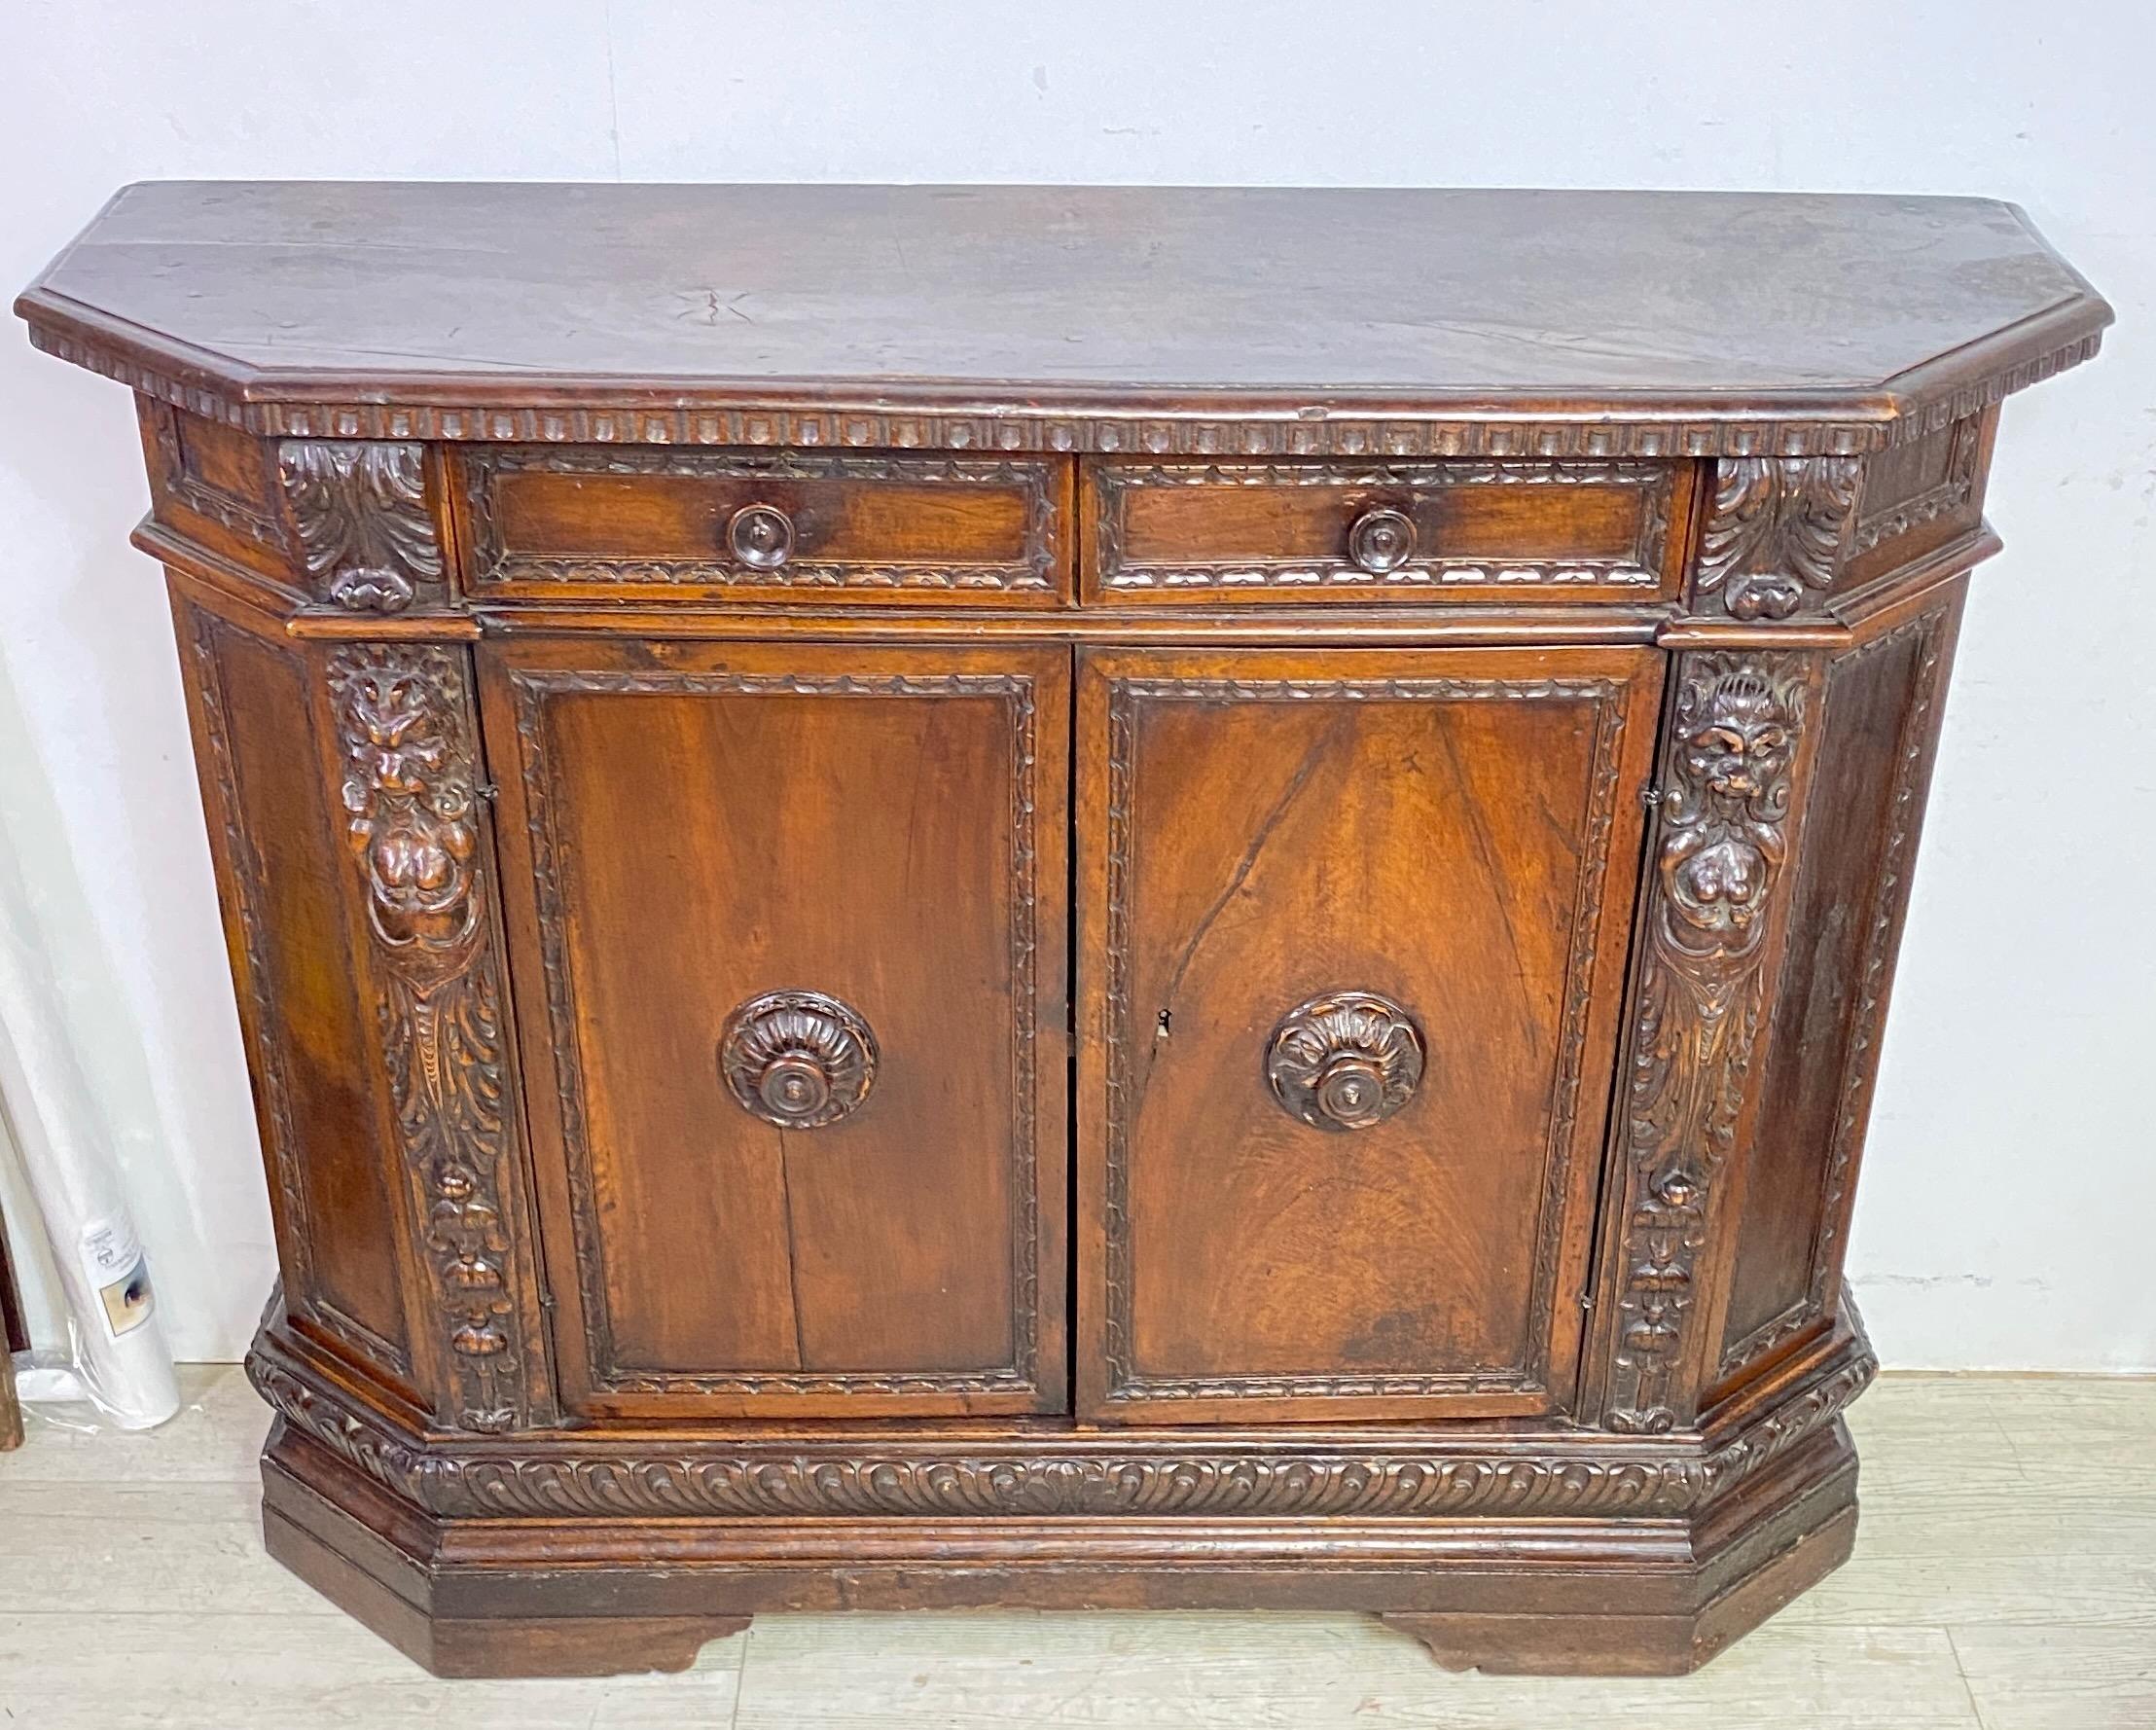 Hand-Carved 17th Century Walnut Italian Renaissance Credenza For Sale